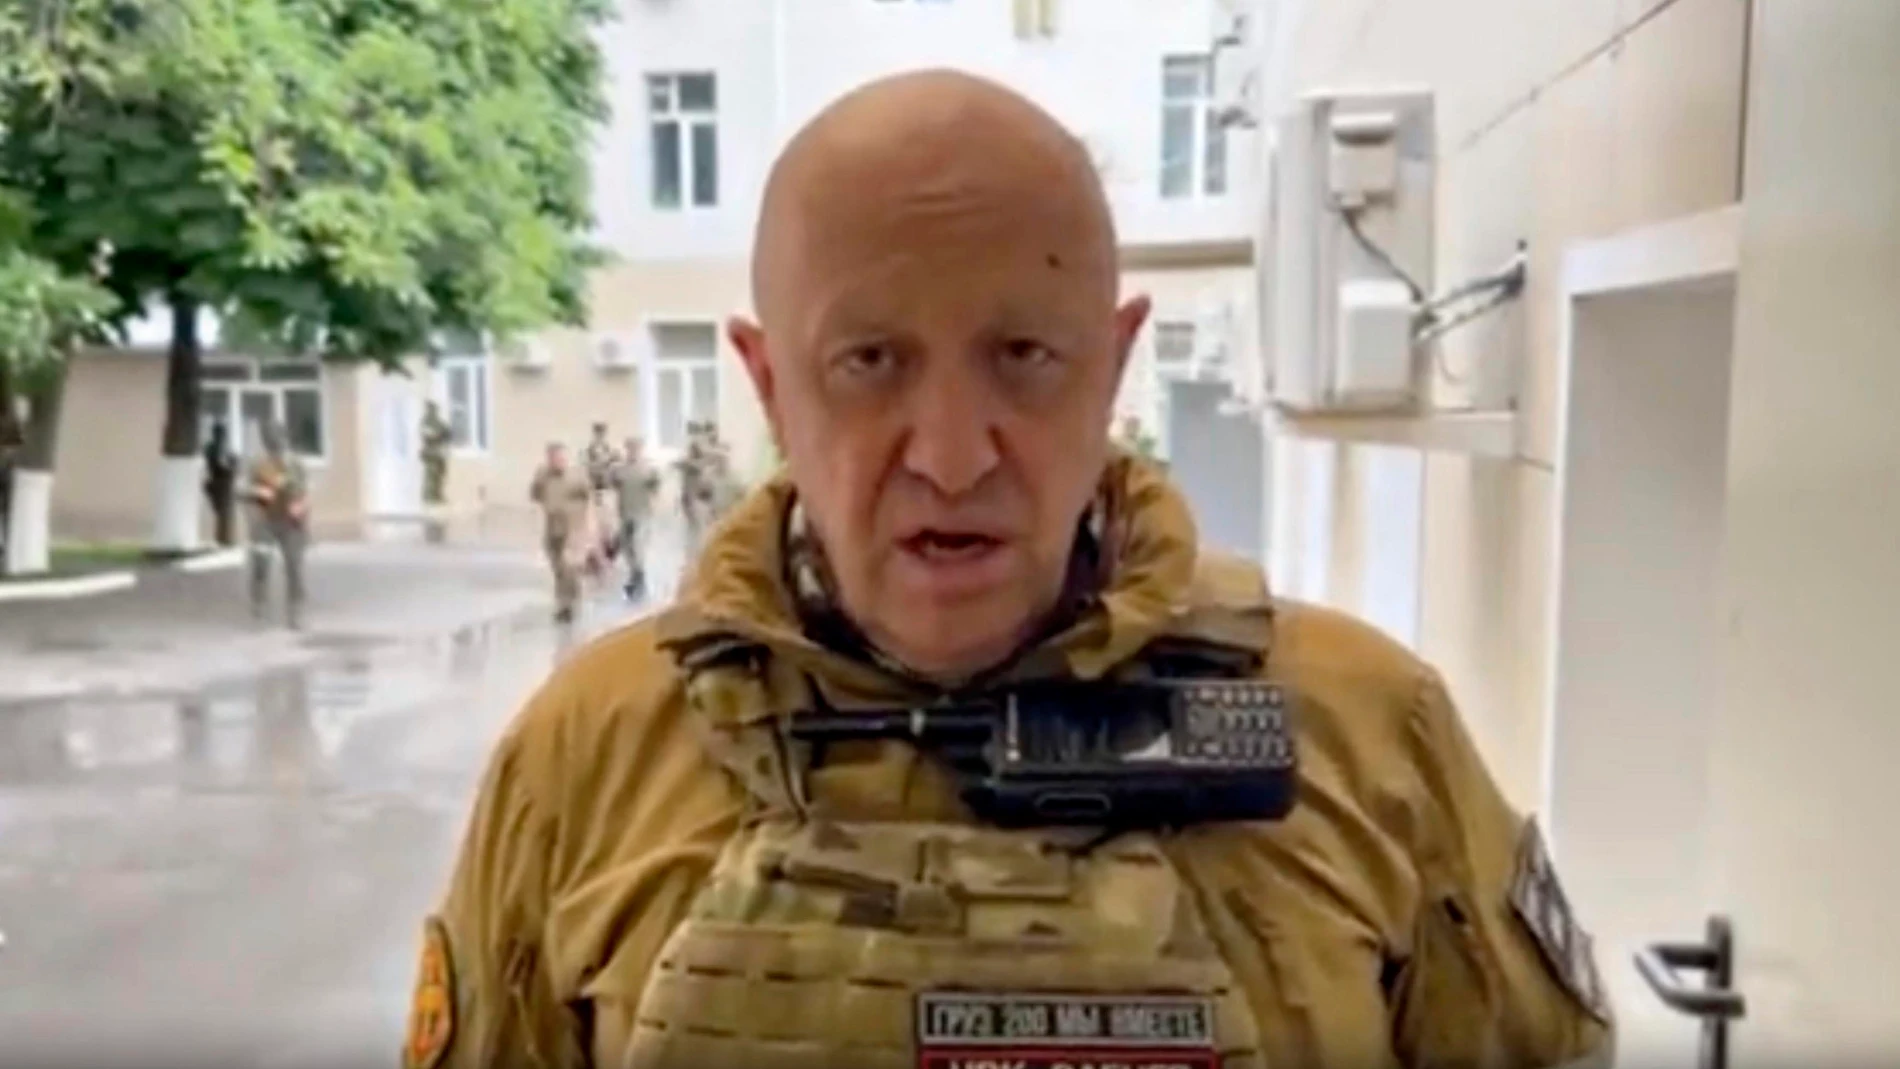 June 24, 2023, Rostov-on-Don, Donetsk Oblast, Ukraine: A screen grab of Russian Yevgeny Prigozhin, owner of the Wagner Group of mercenaries broadcasting from inside the Russian Military Southern District headquarters surrounded by his loyal fighters, June 24, 2023 in Rostov-on-Don, Russia. Prigozhin launched a rebellion against Moscow accusing the government of lying to the nation and corruption. 24/06/2023